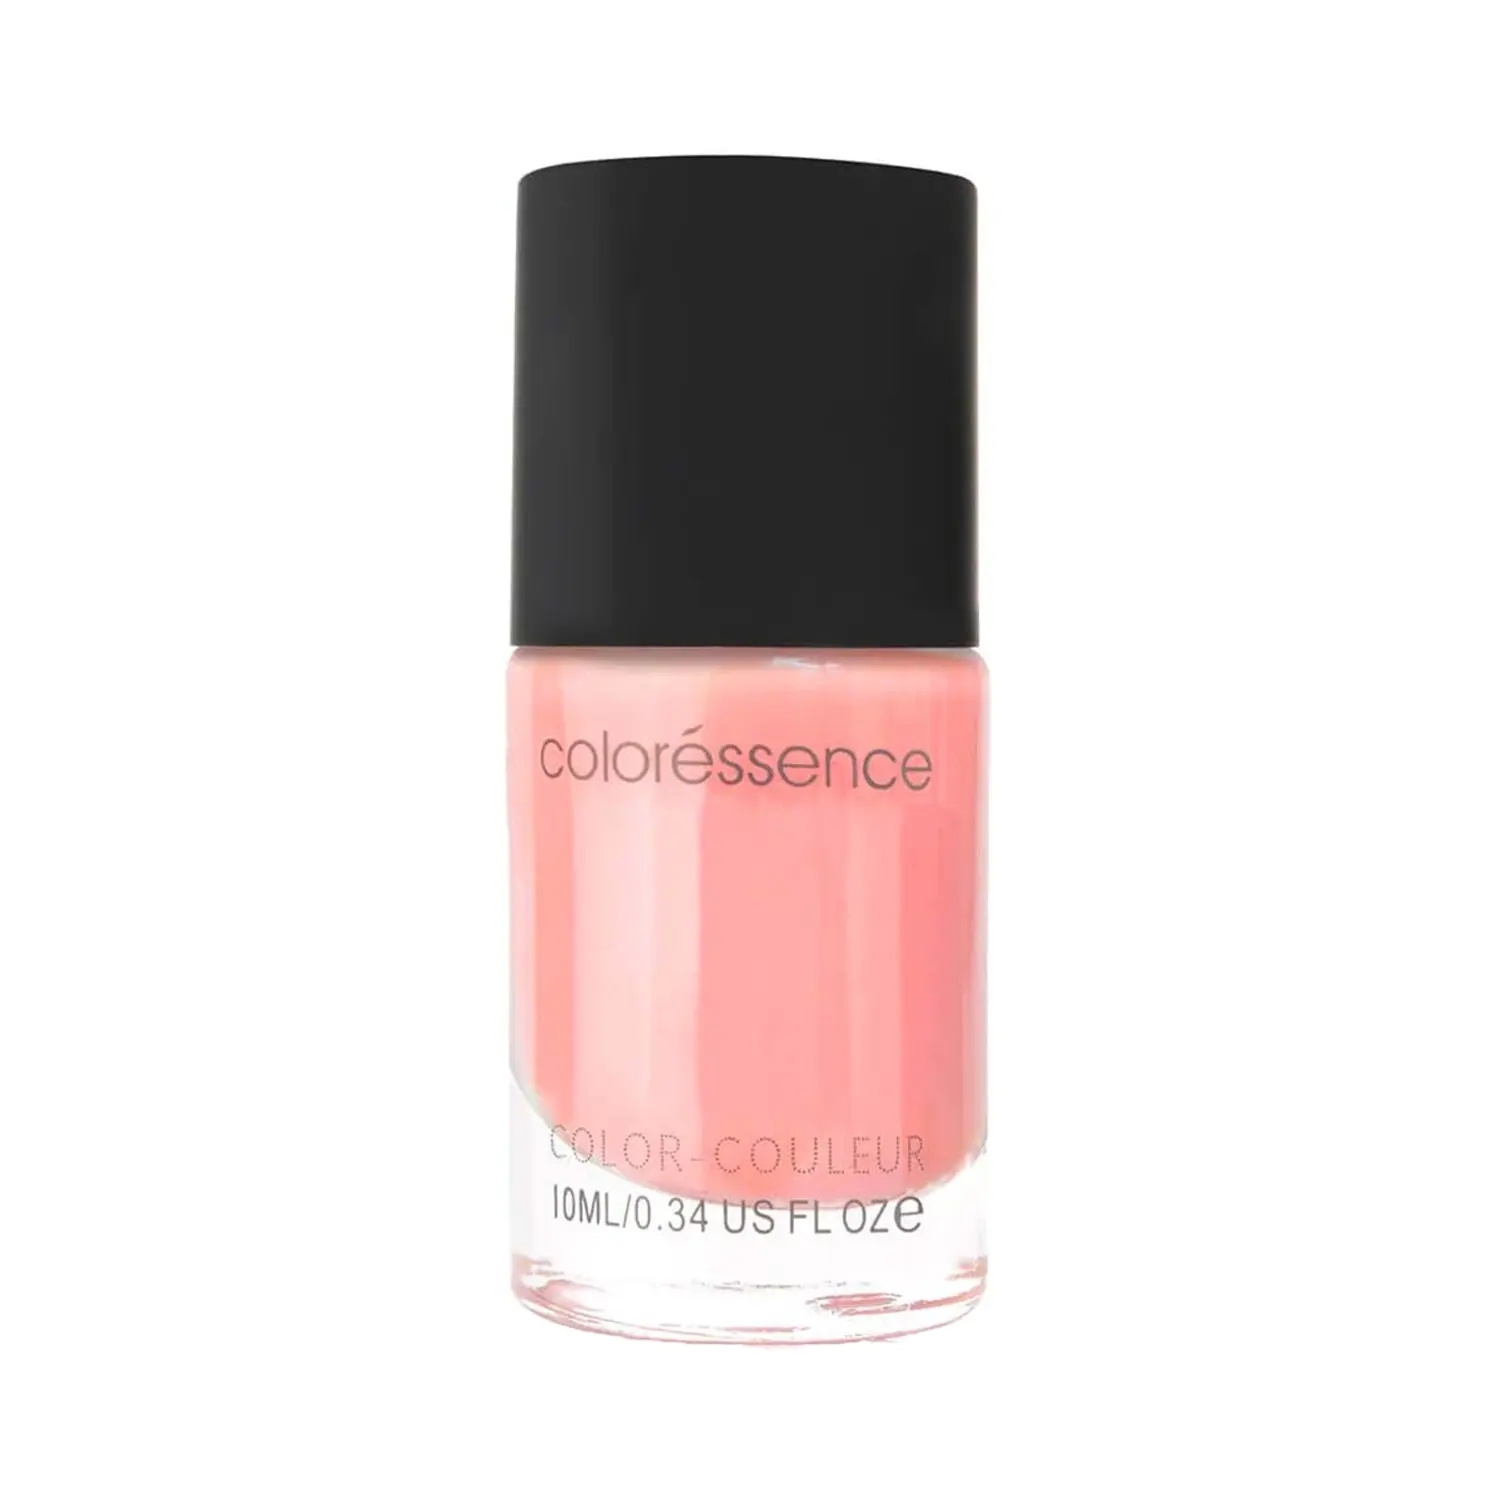 Coloressence Instaglam High Definition BB Cream Spf-15, with Grape Seed  Oil, 40 g - Beauty Bazaar